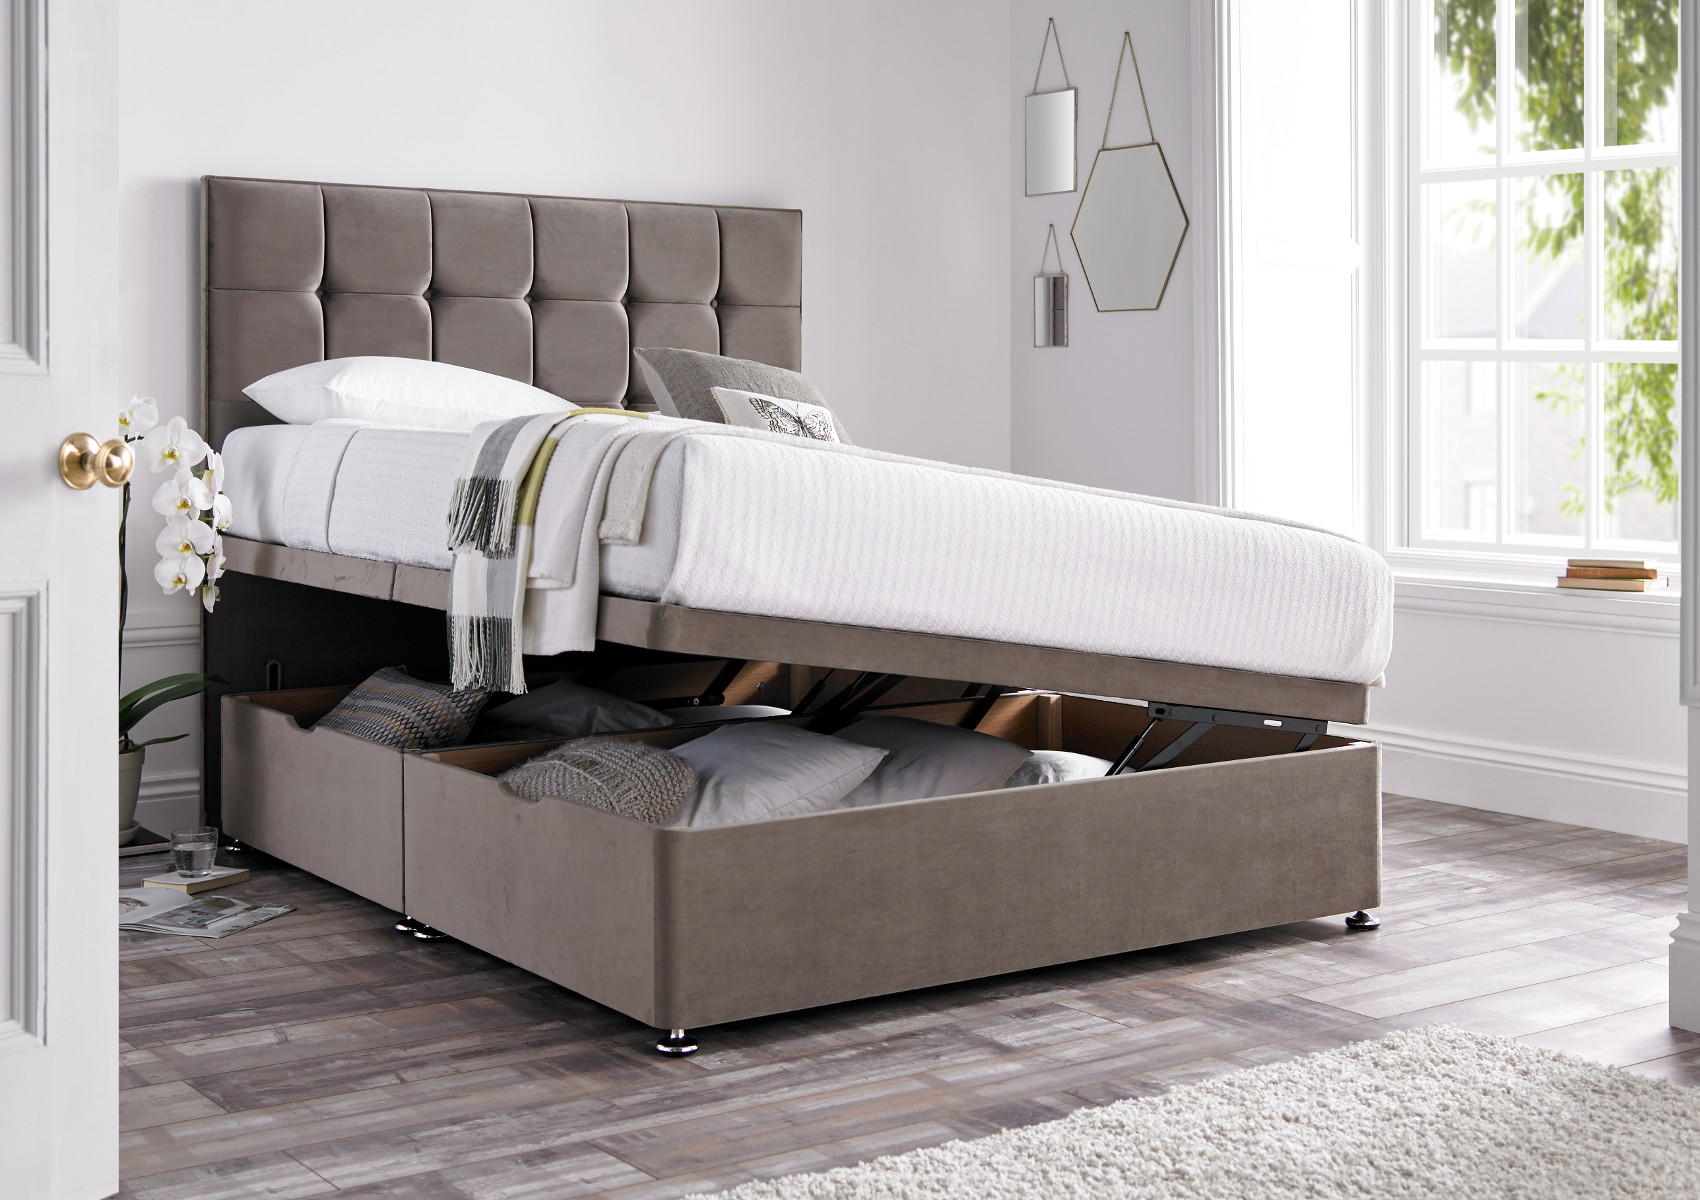 View Harbour Shetland Nickel Upholstered King Size Ottoman Bed Time4Sleep information